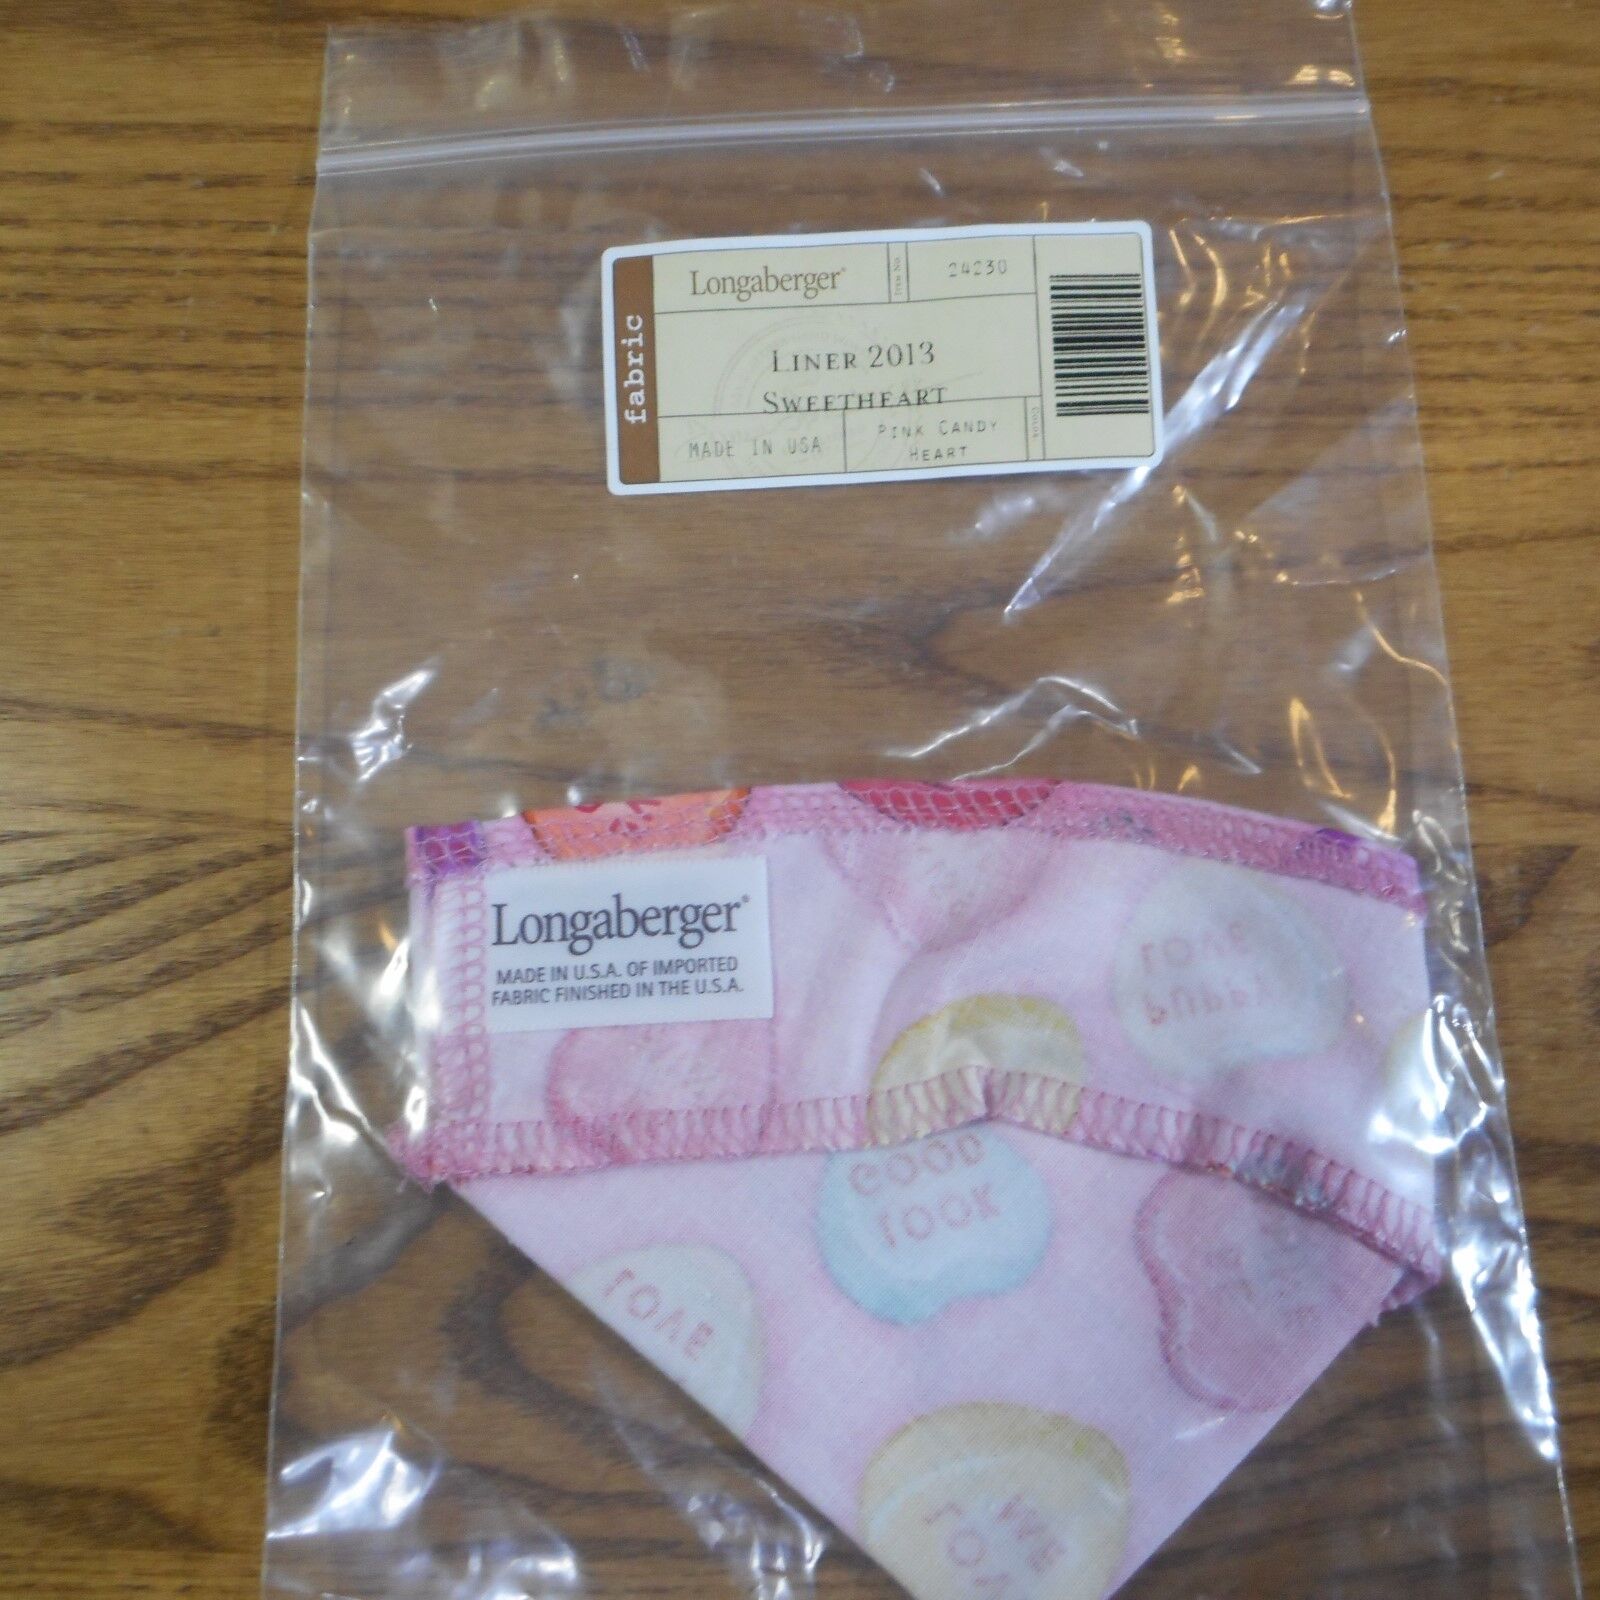 Longaberger Liner 2013 Sweetheart Pink Candy Heart #24230